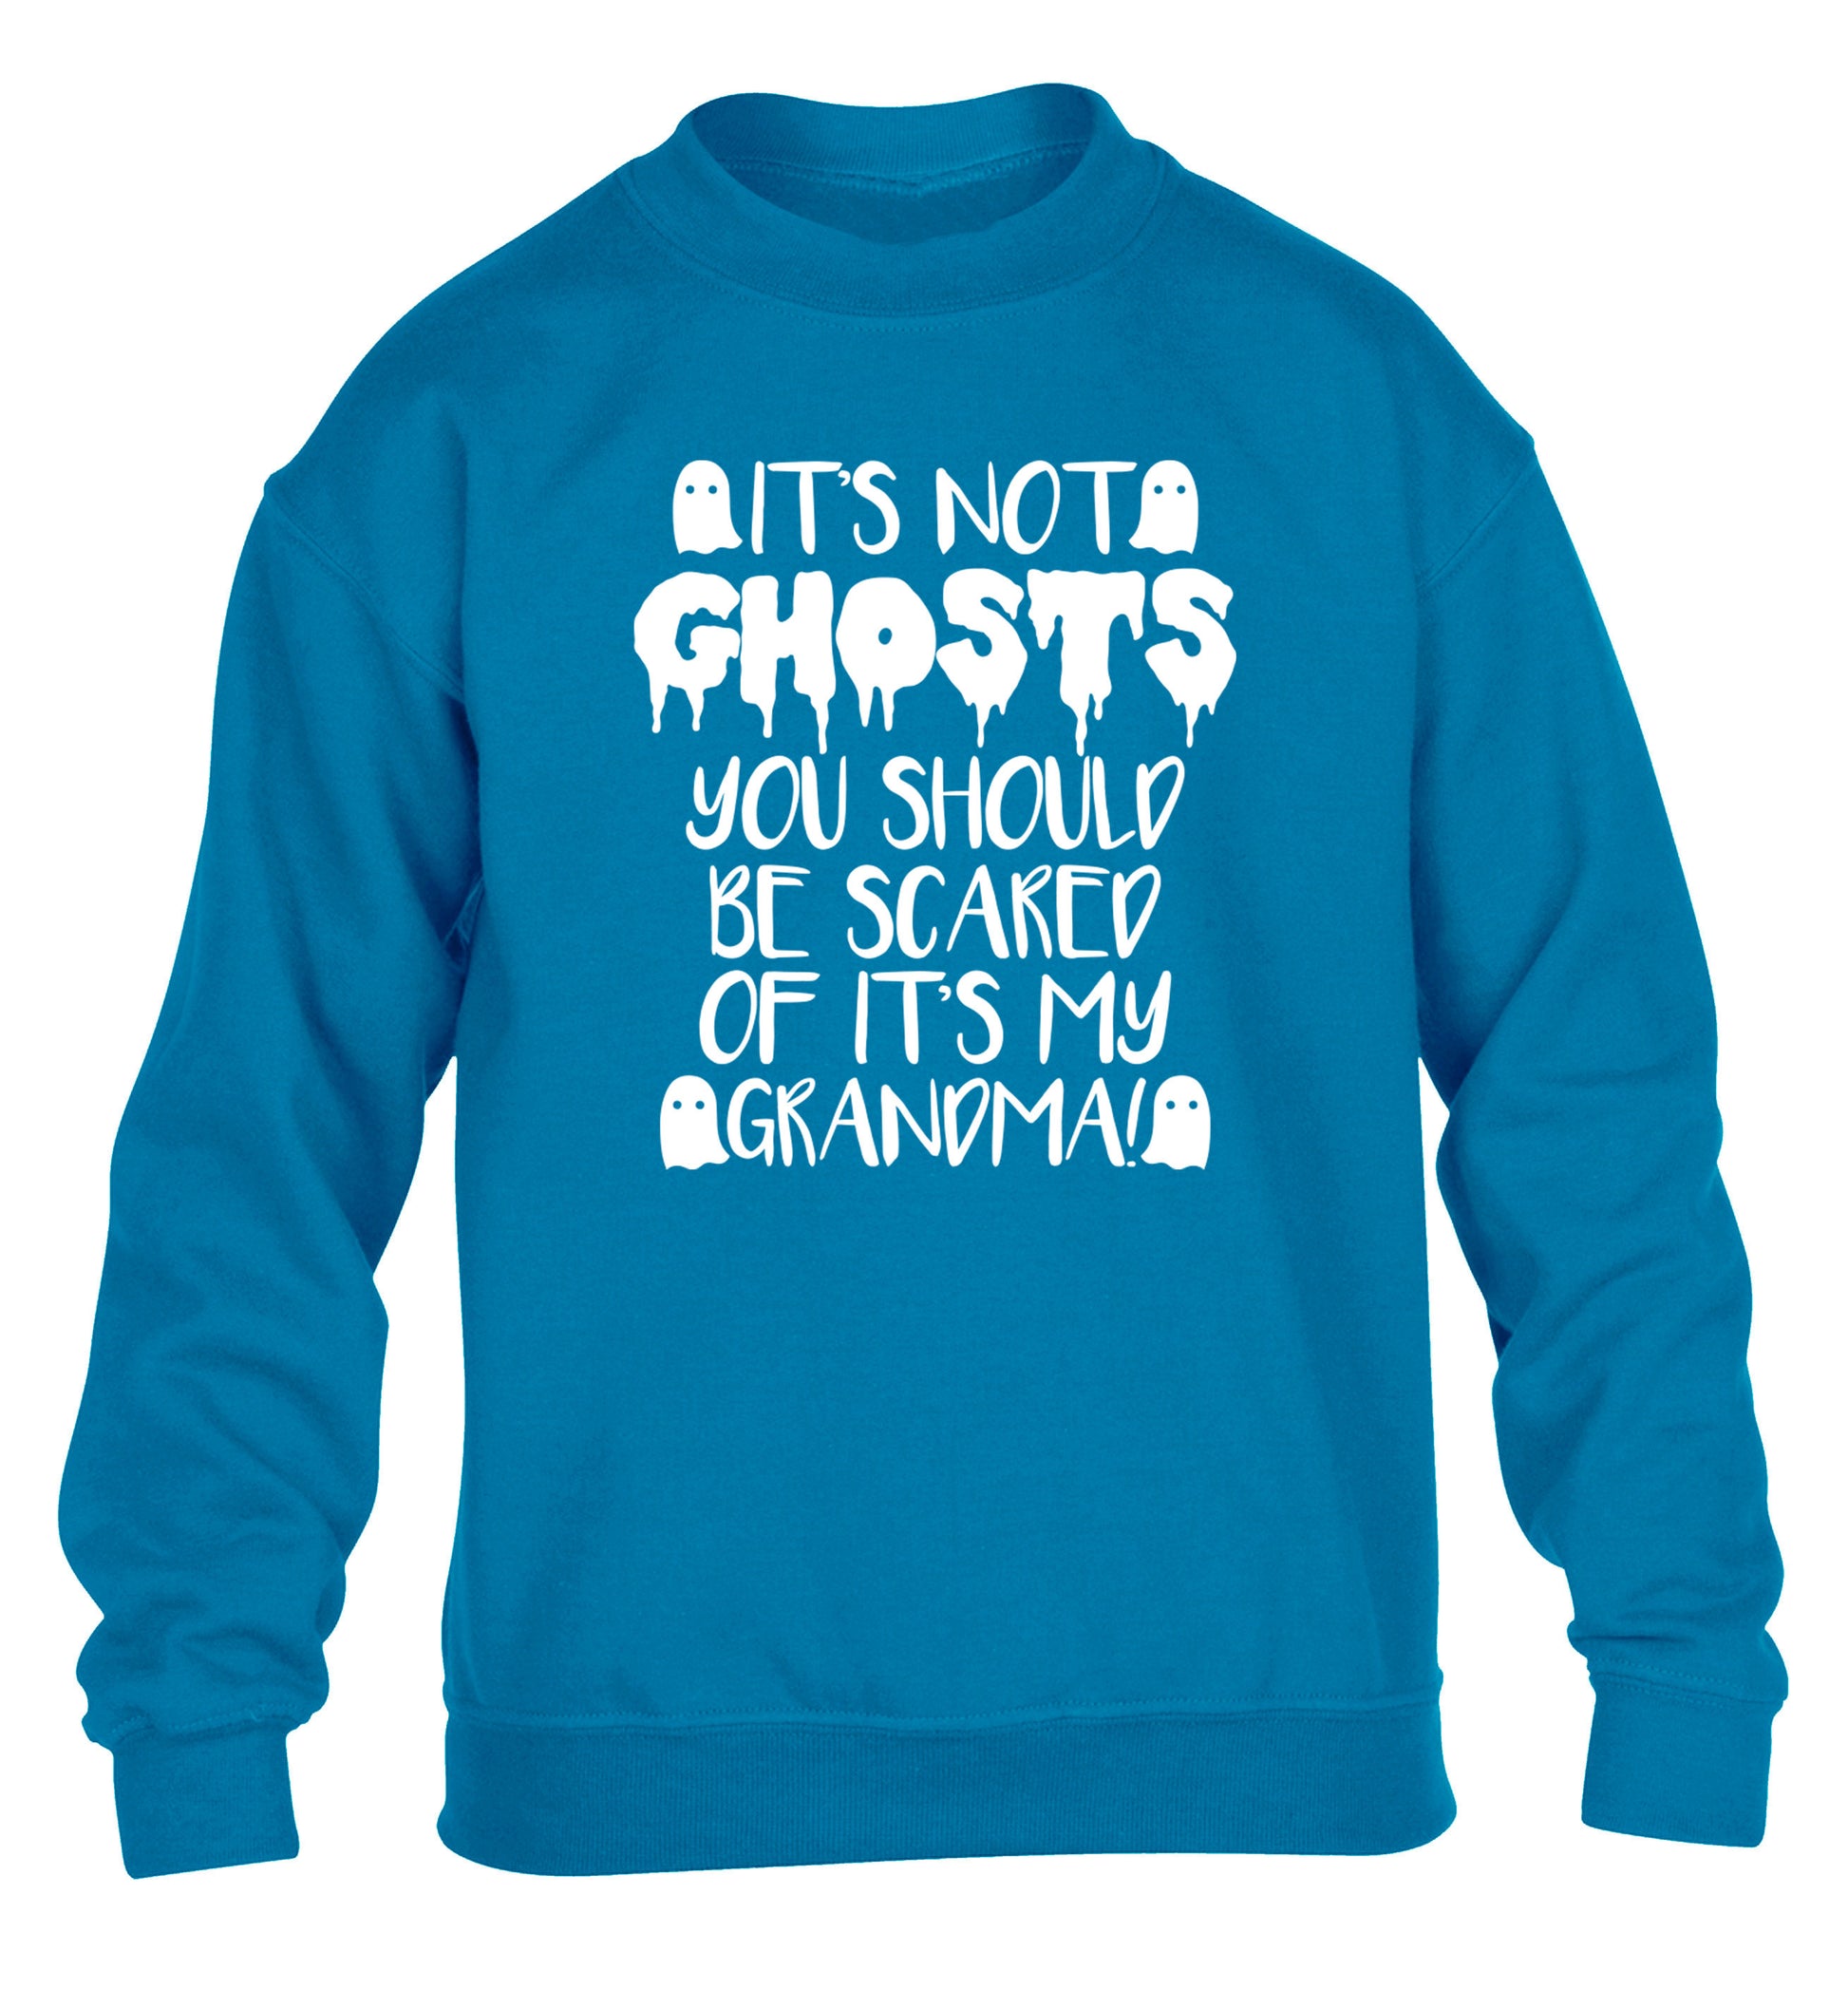 It's not ghosts you should be scared of it's my grandma! children's blue sweater 12-14 Years